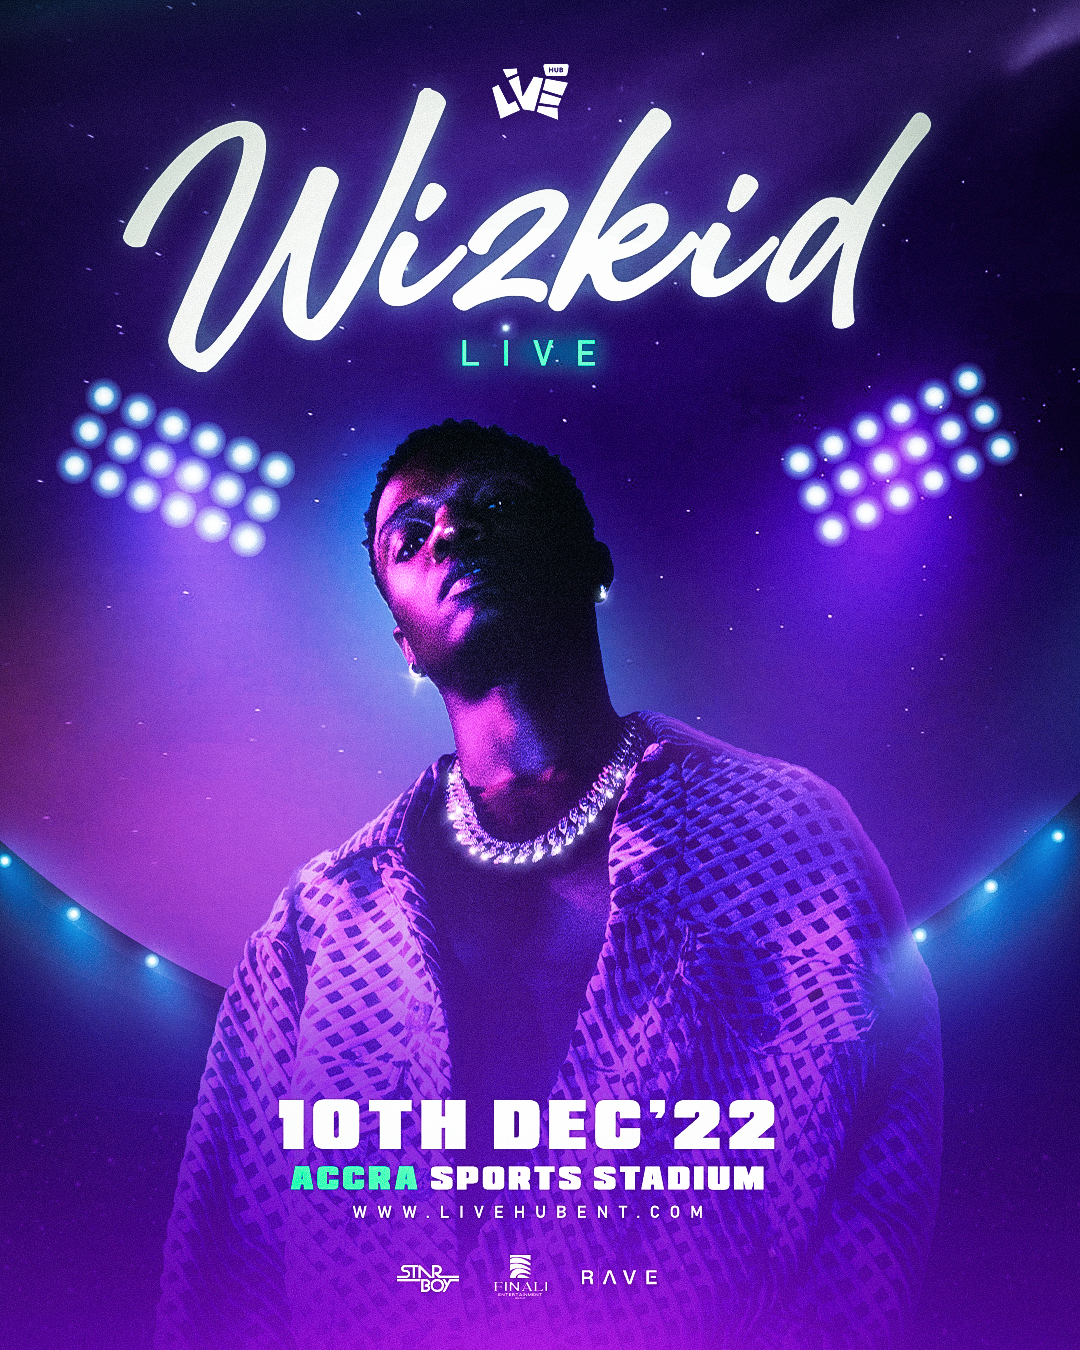 Wizkid to hold debut concert at Accra Sports Stadium on December 10